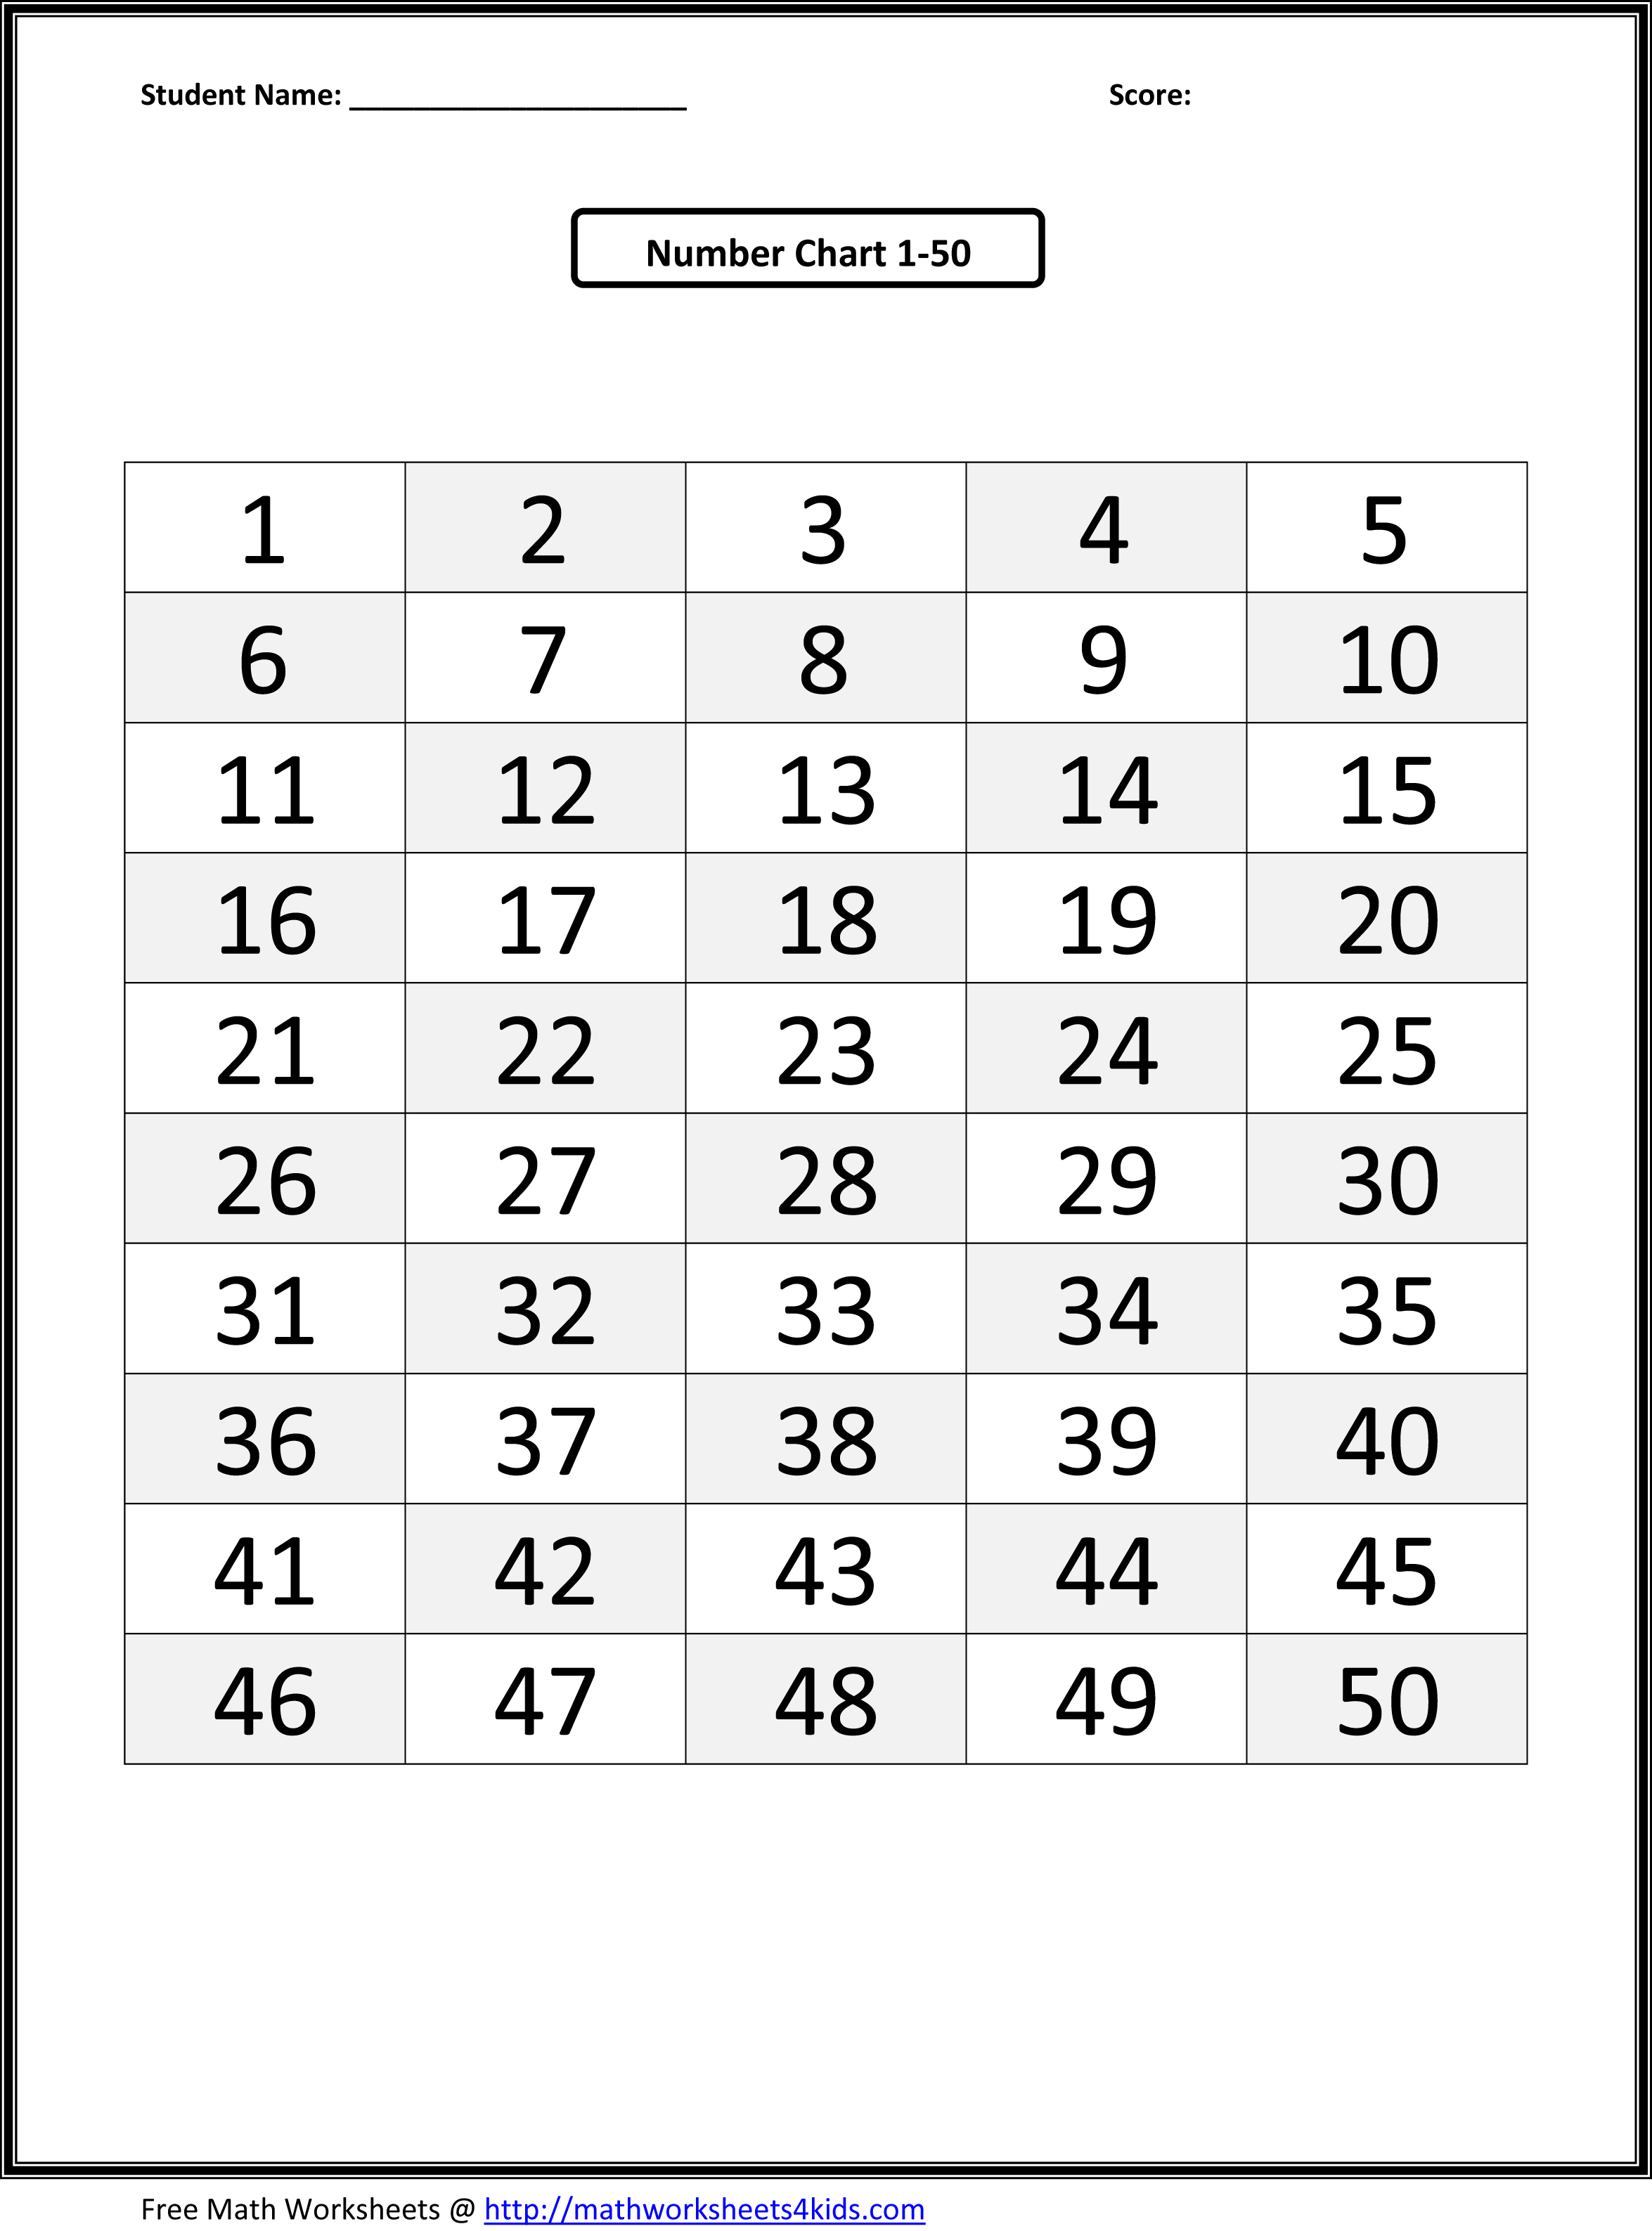 6-best-images-of-printable-number-chart-1-50-printable-number-chart-1